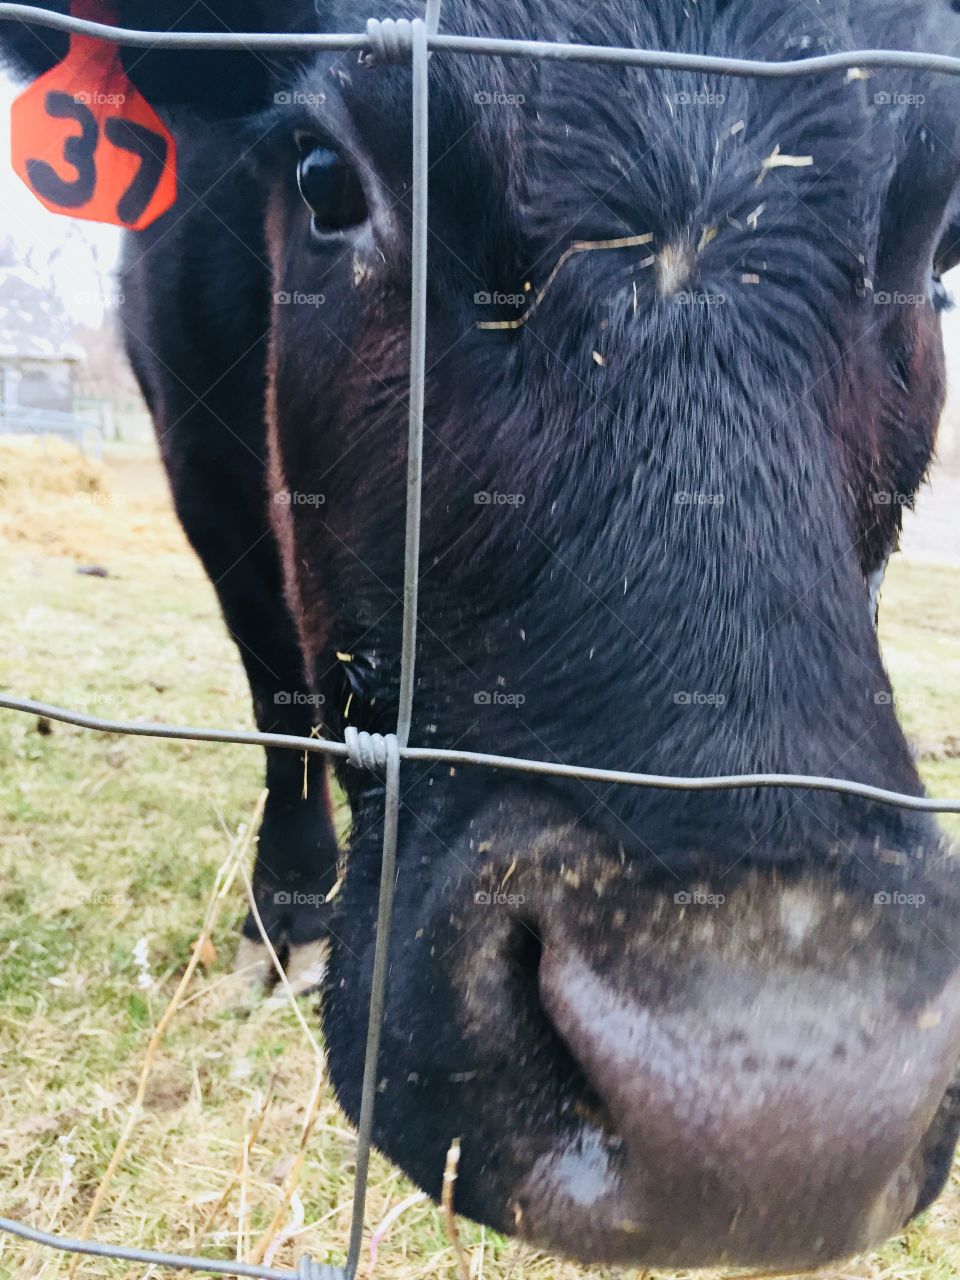 A young black steer with an ear tag pokes his nose through a wire fence, hoping for something green to eat